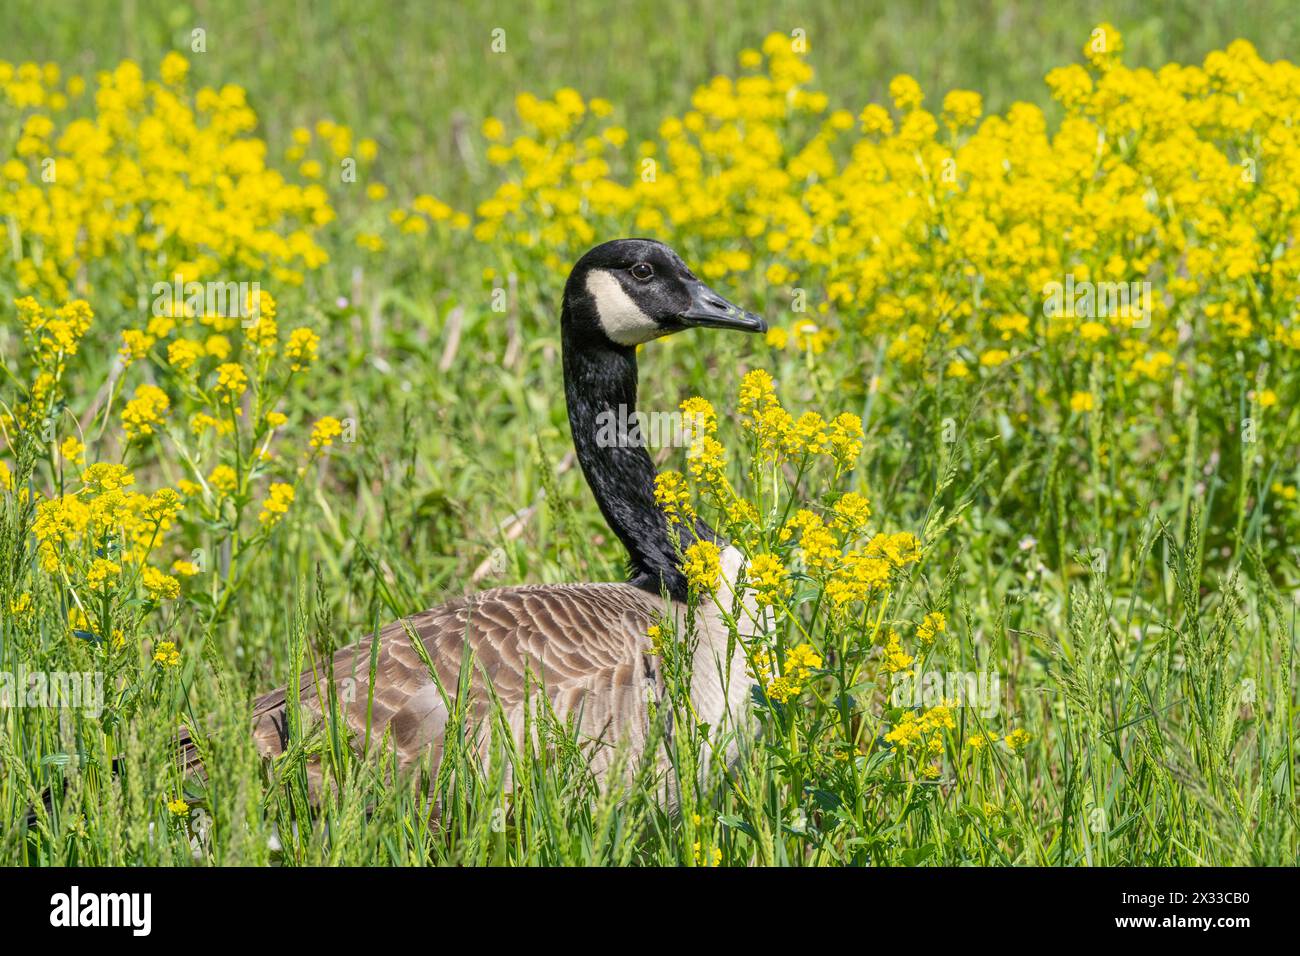 Close-up portrait of a Canada Goose nesting in a field of yellow wildflowers in spring. Stock Photo